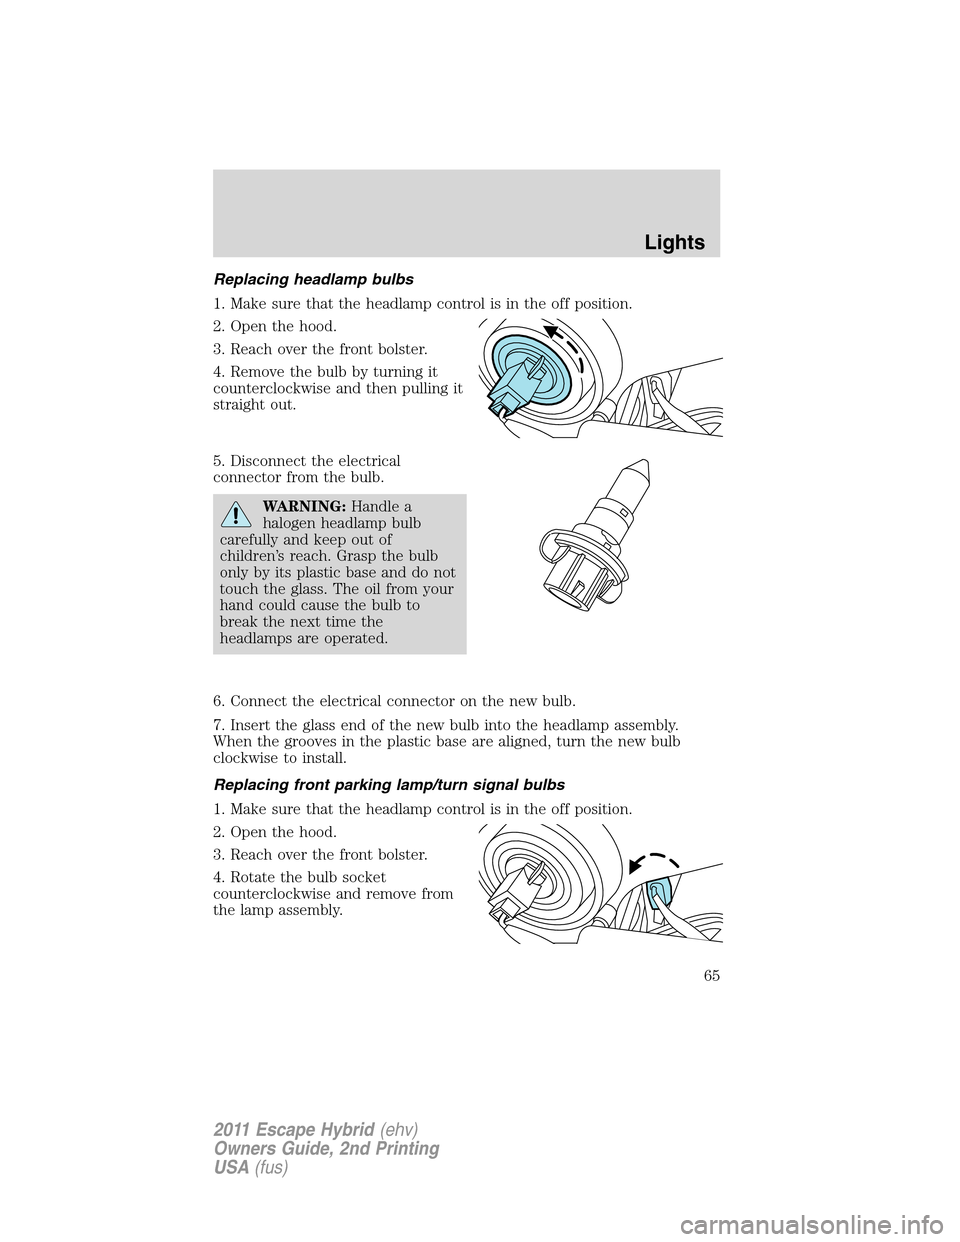 FORD ESCAPE HYBRID 2011 2.G Owners Manual Replacing headlamp bulbs
1. Make sure that the headlamp control is in the off position.
2. Open the hood.
3. Reach over the front bolster.
4. Remove the bulb by turning it
counterclockwise and then pu